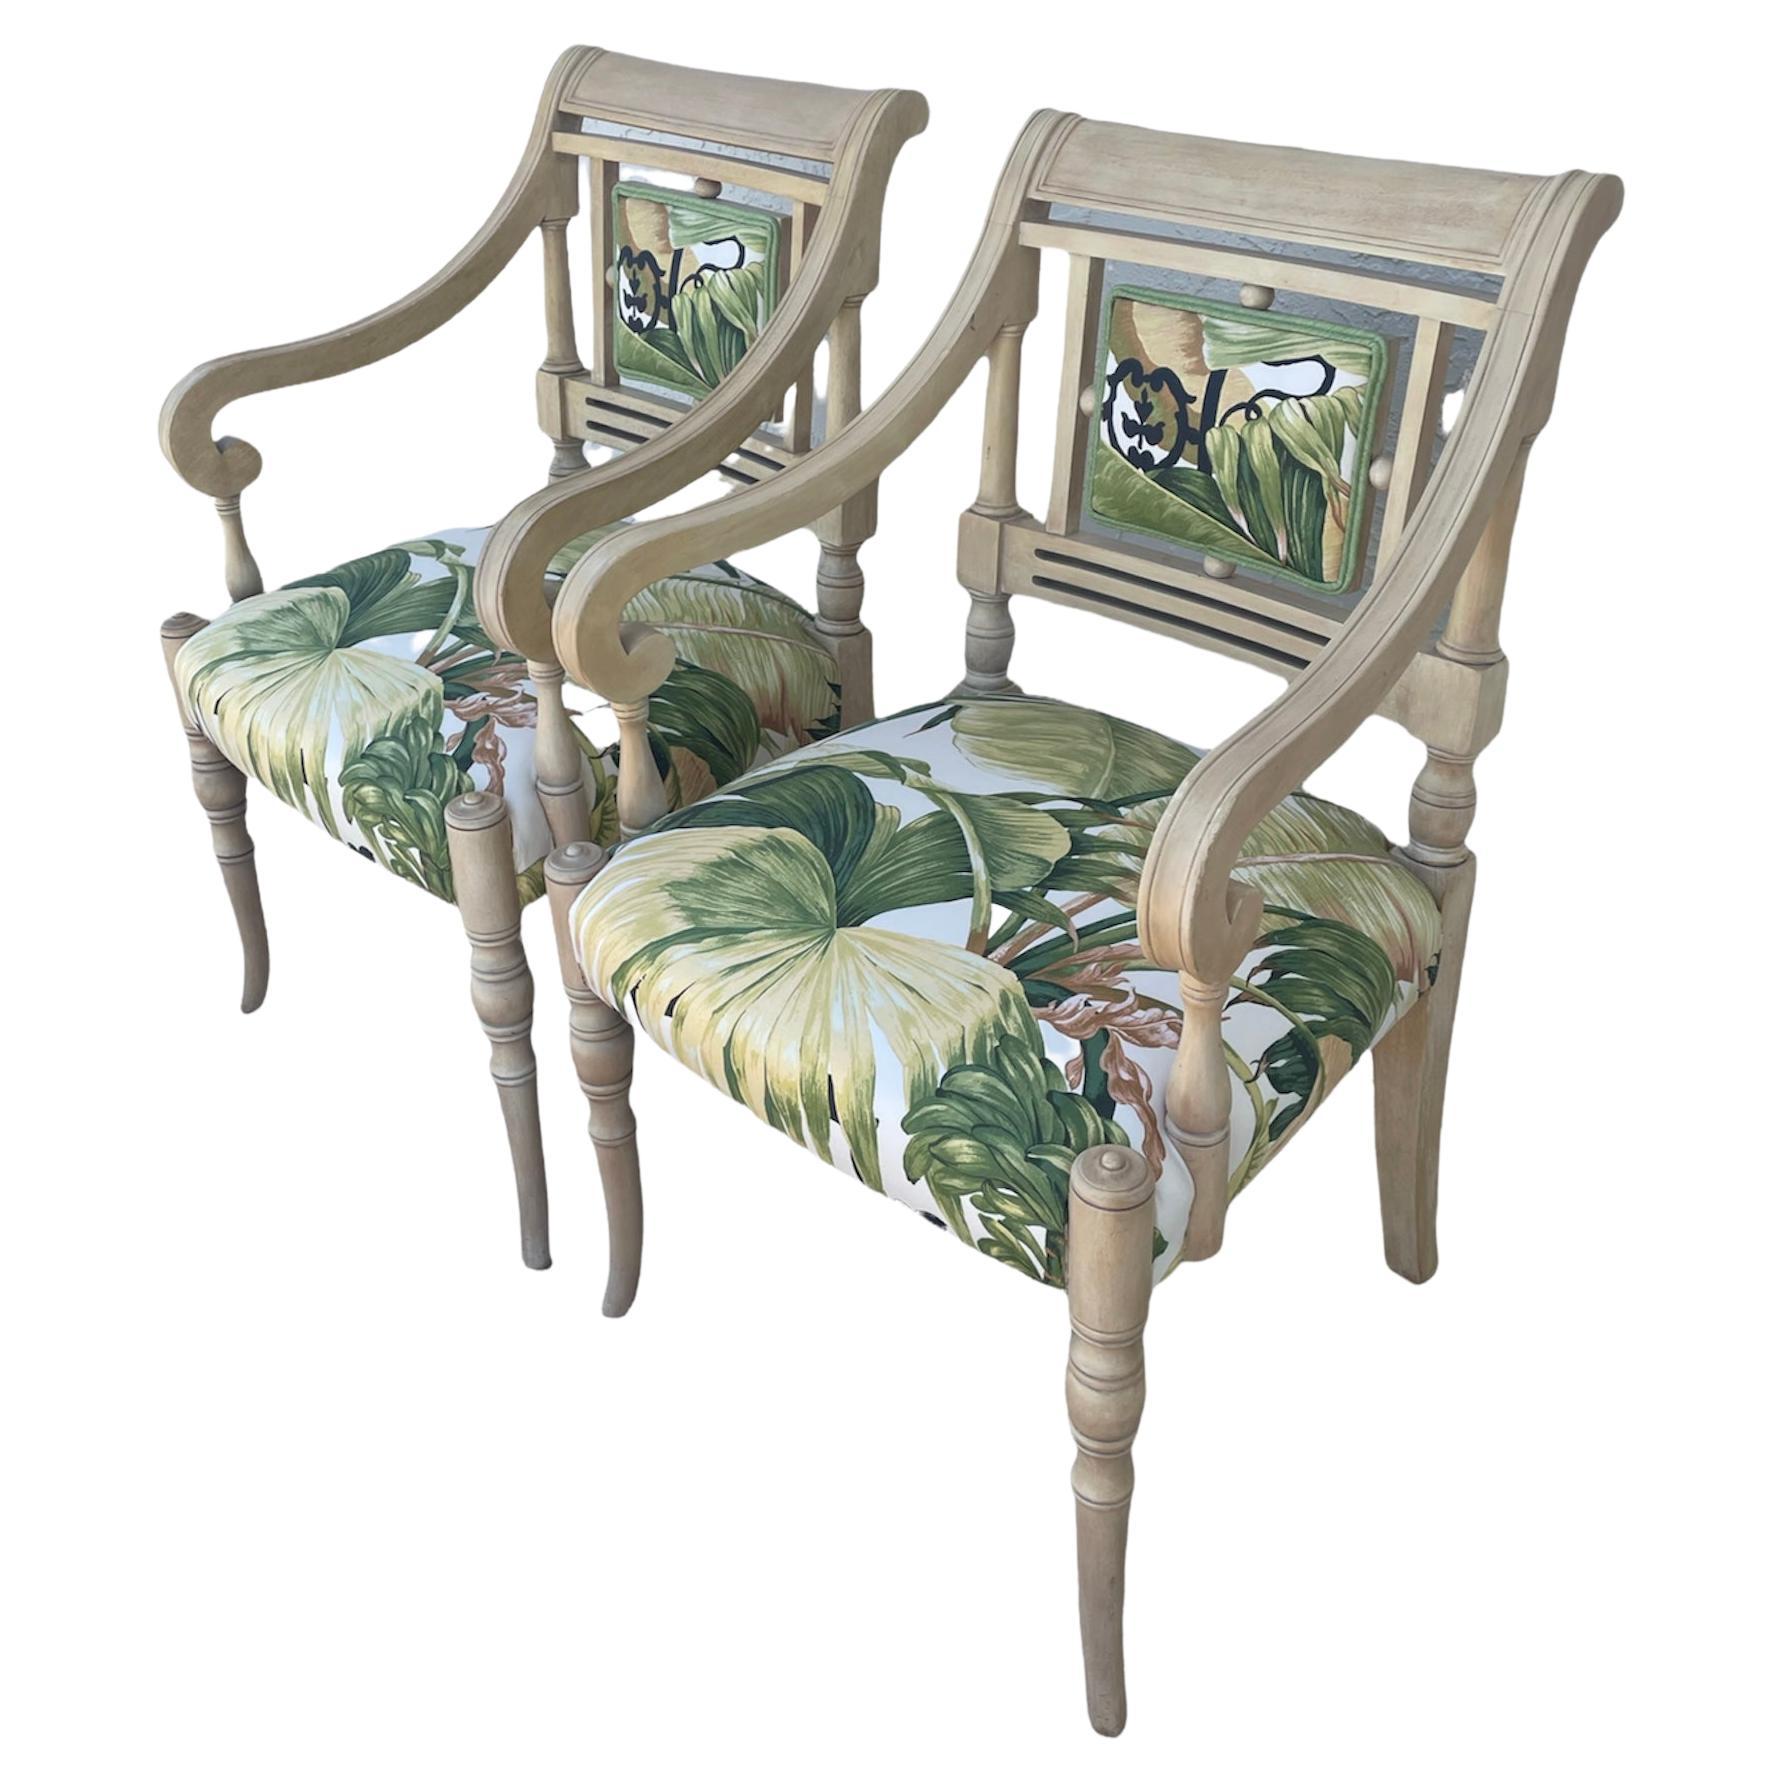 Ultra chic pair. Newly upolstered armchairs in a vintage graphic tropical print by Boussac Tissu D' ameublement. Swedish design, plaid, circular legs, painted with a fabric back window cut-out, detailed design in the woodwork makes these a very